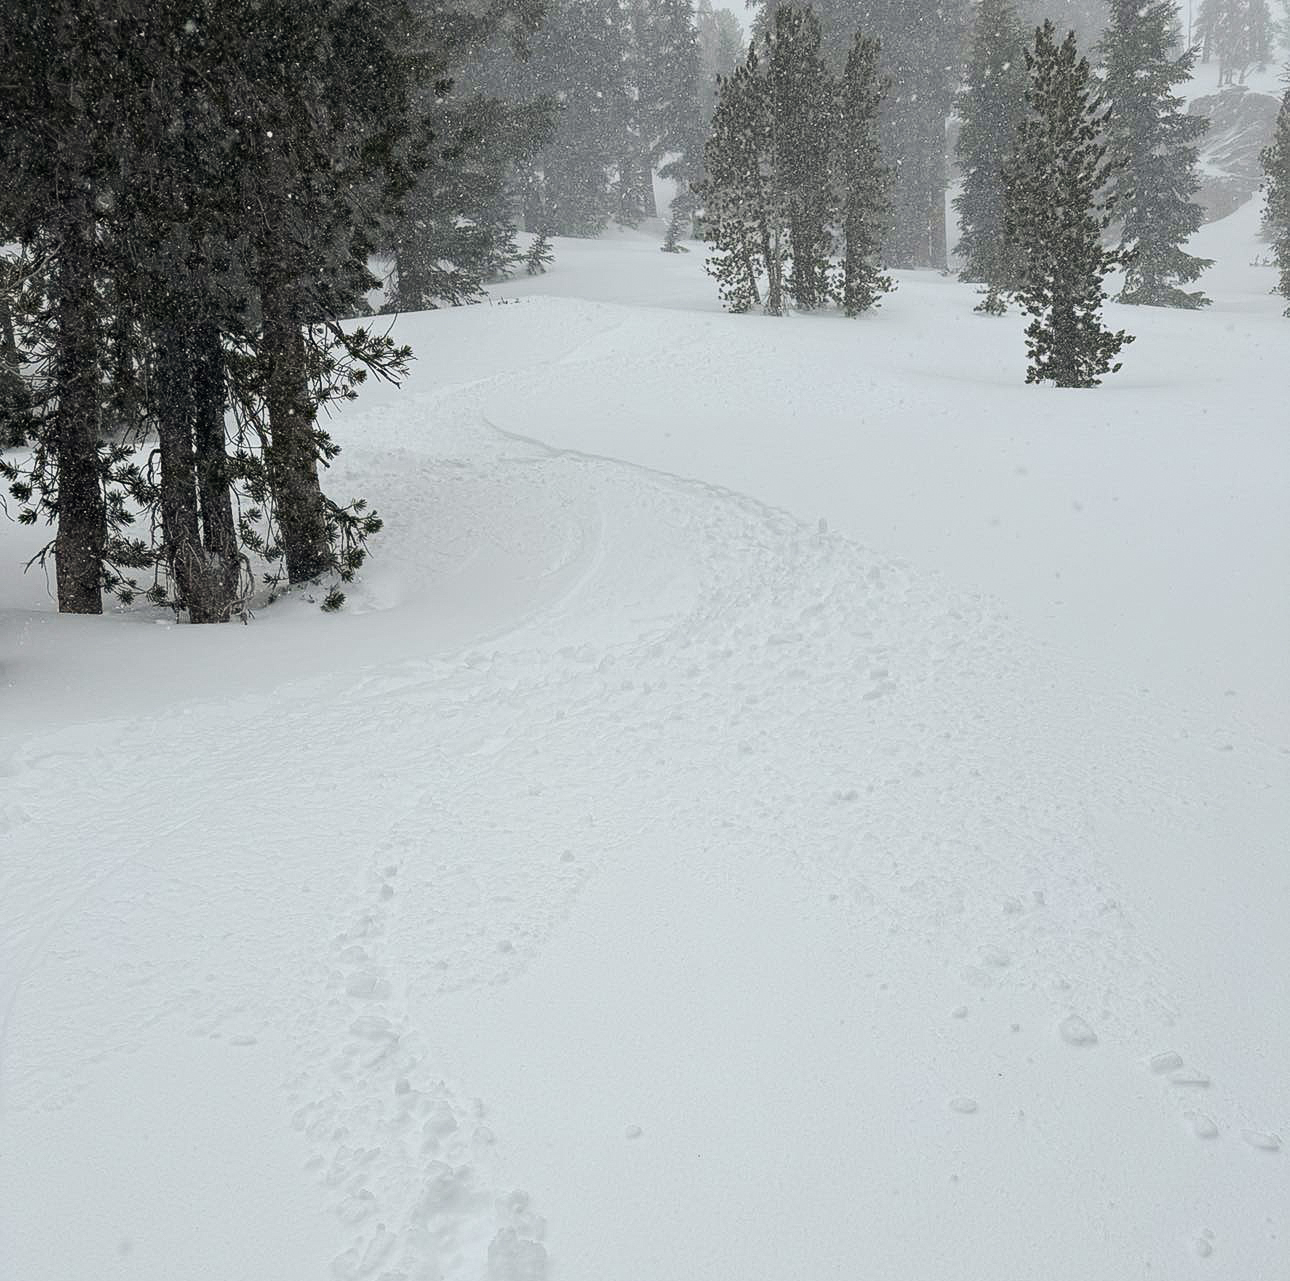 3-1-24 - Freshies out on Mammoth Mountain